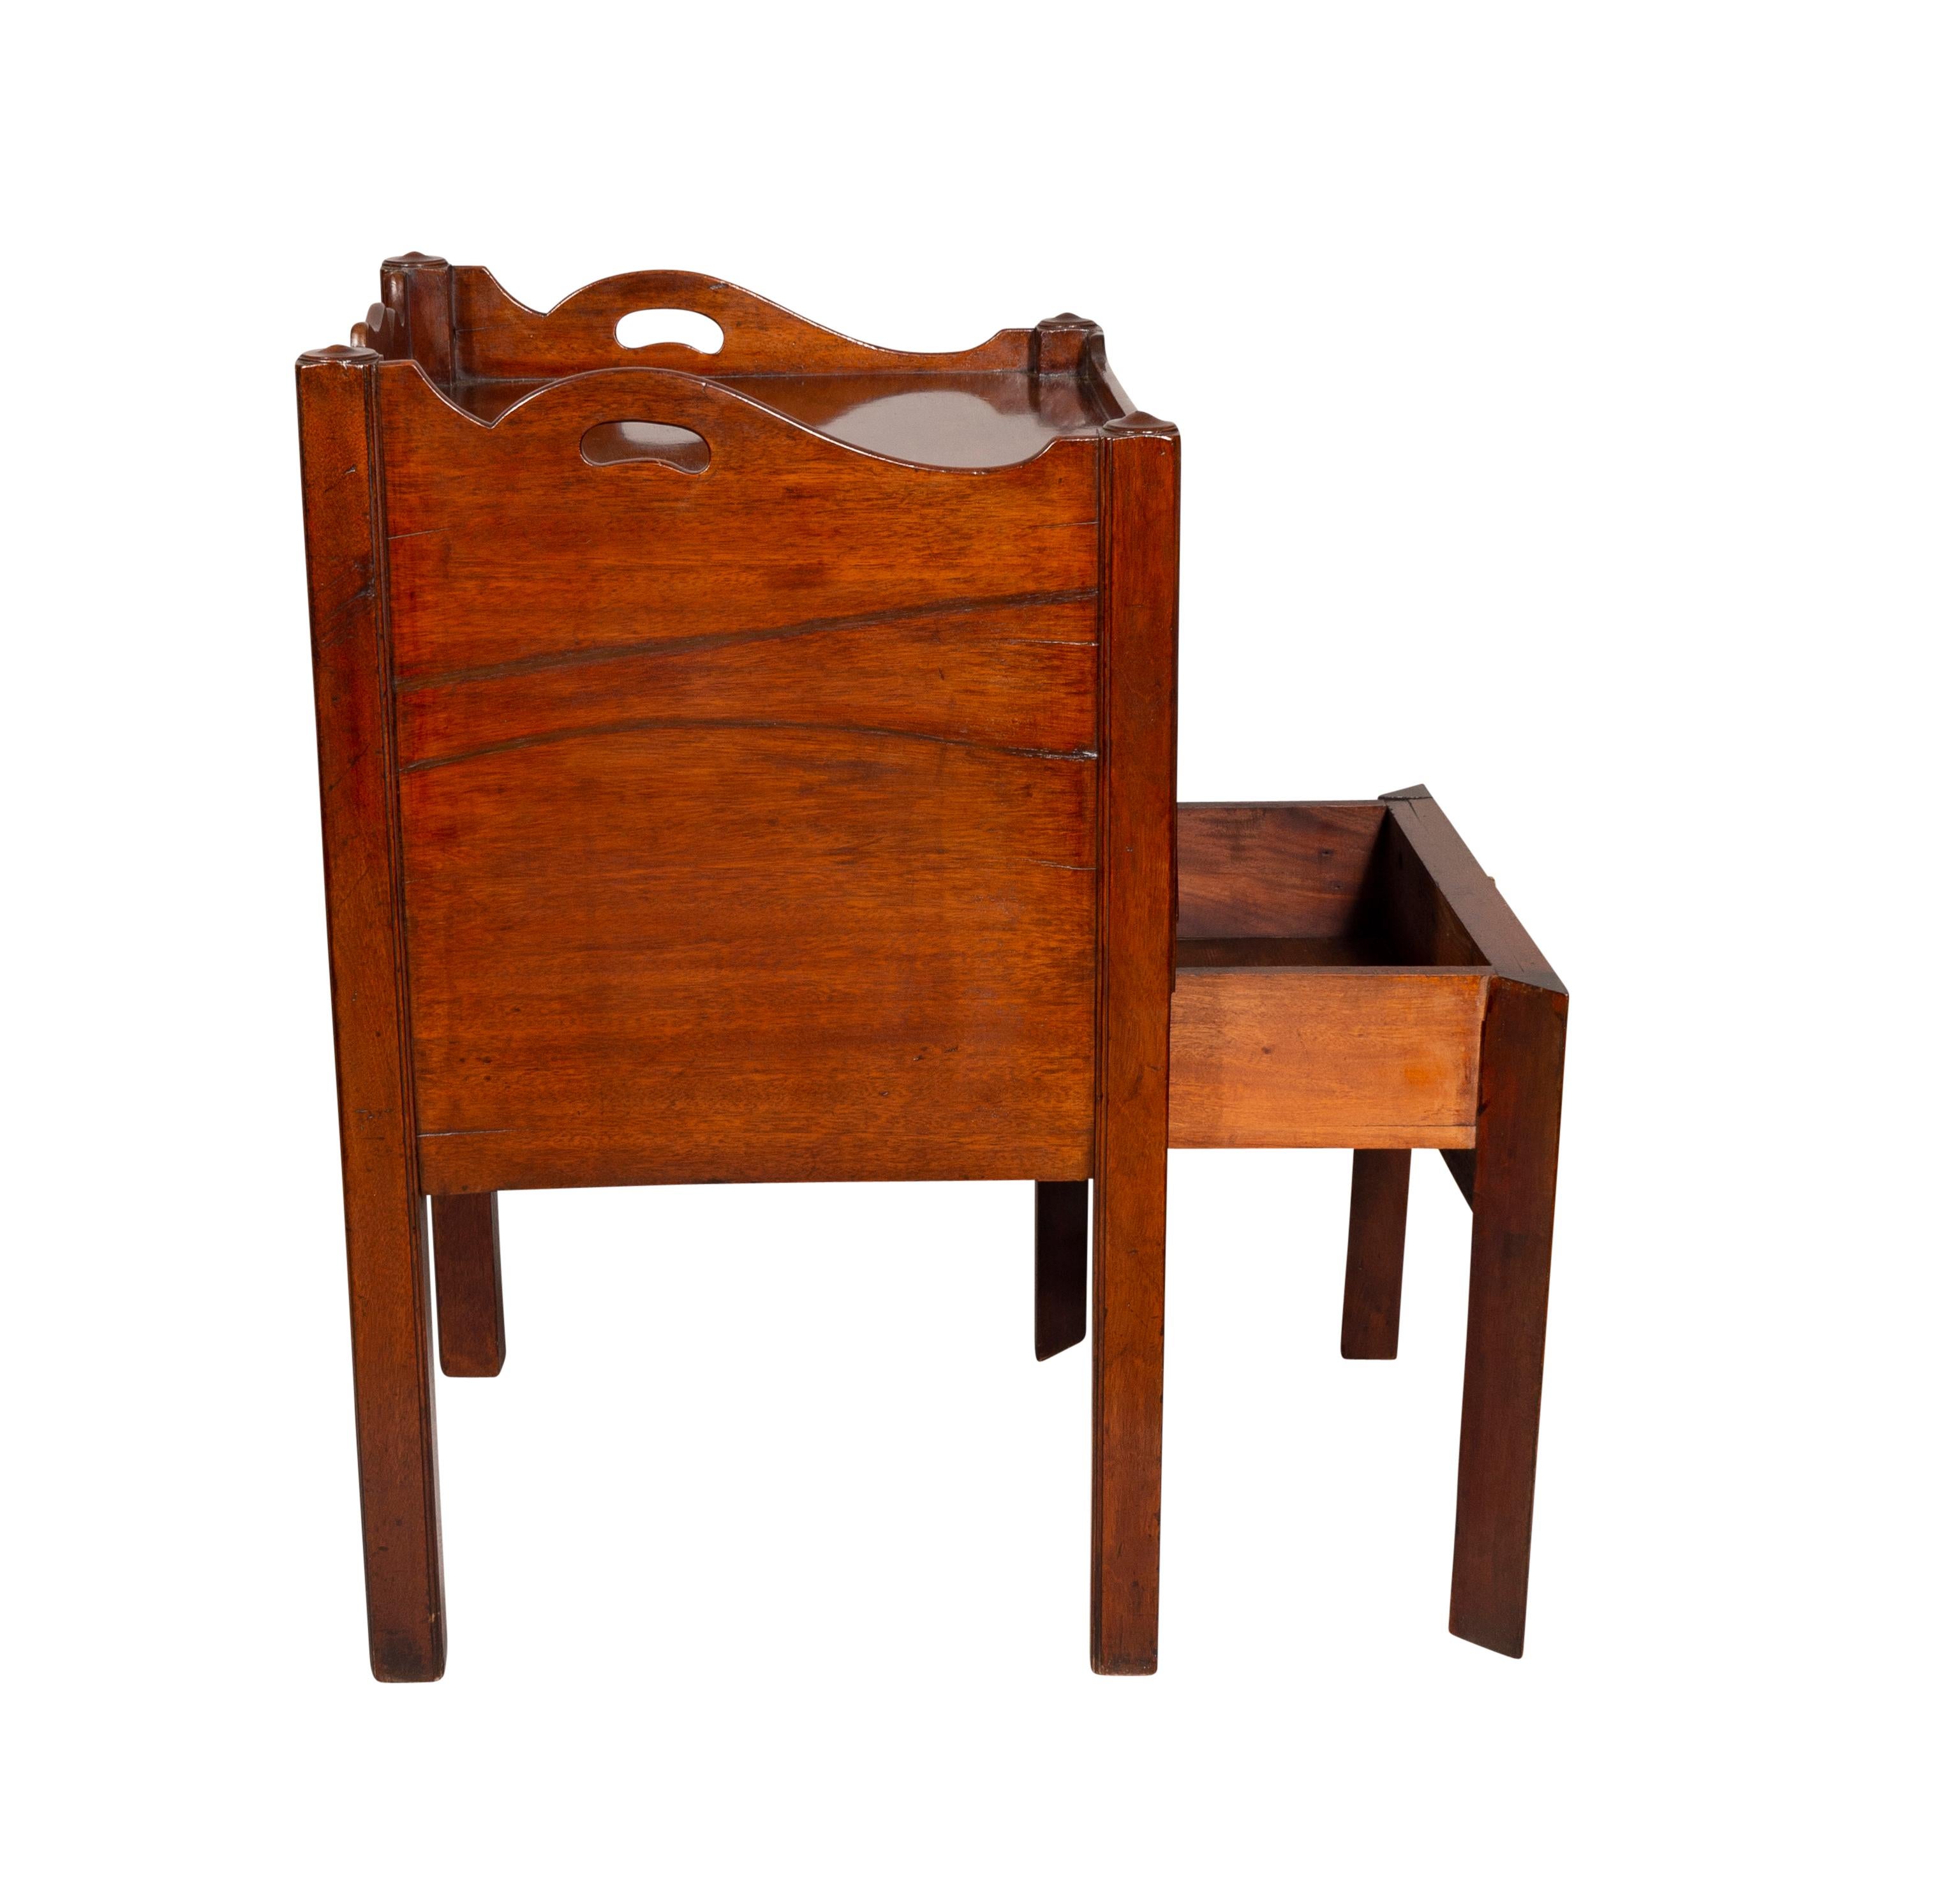 Late 18th Century George III Mahogany Bedside Commode For Sale